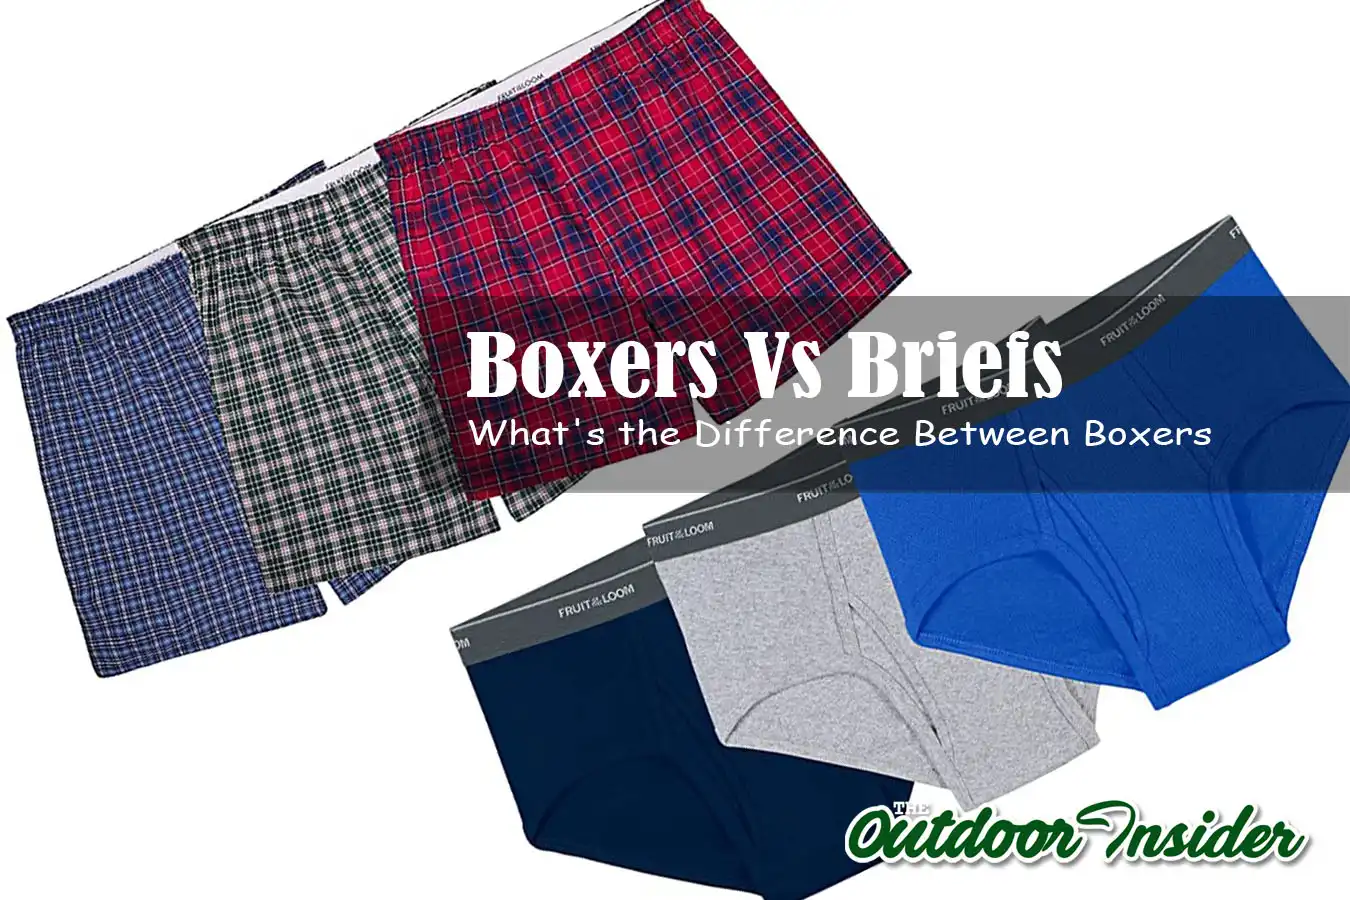 What's the Difference Between Boxers and Briefs